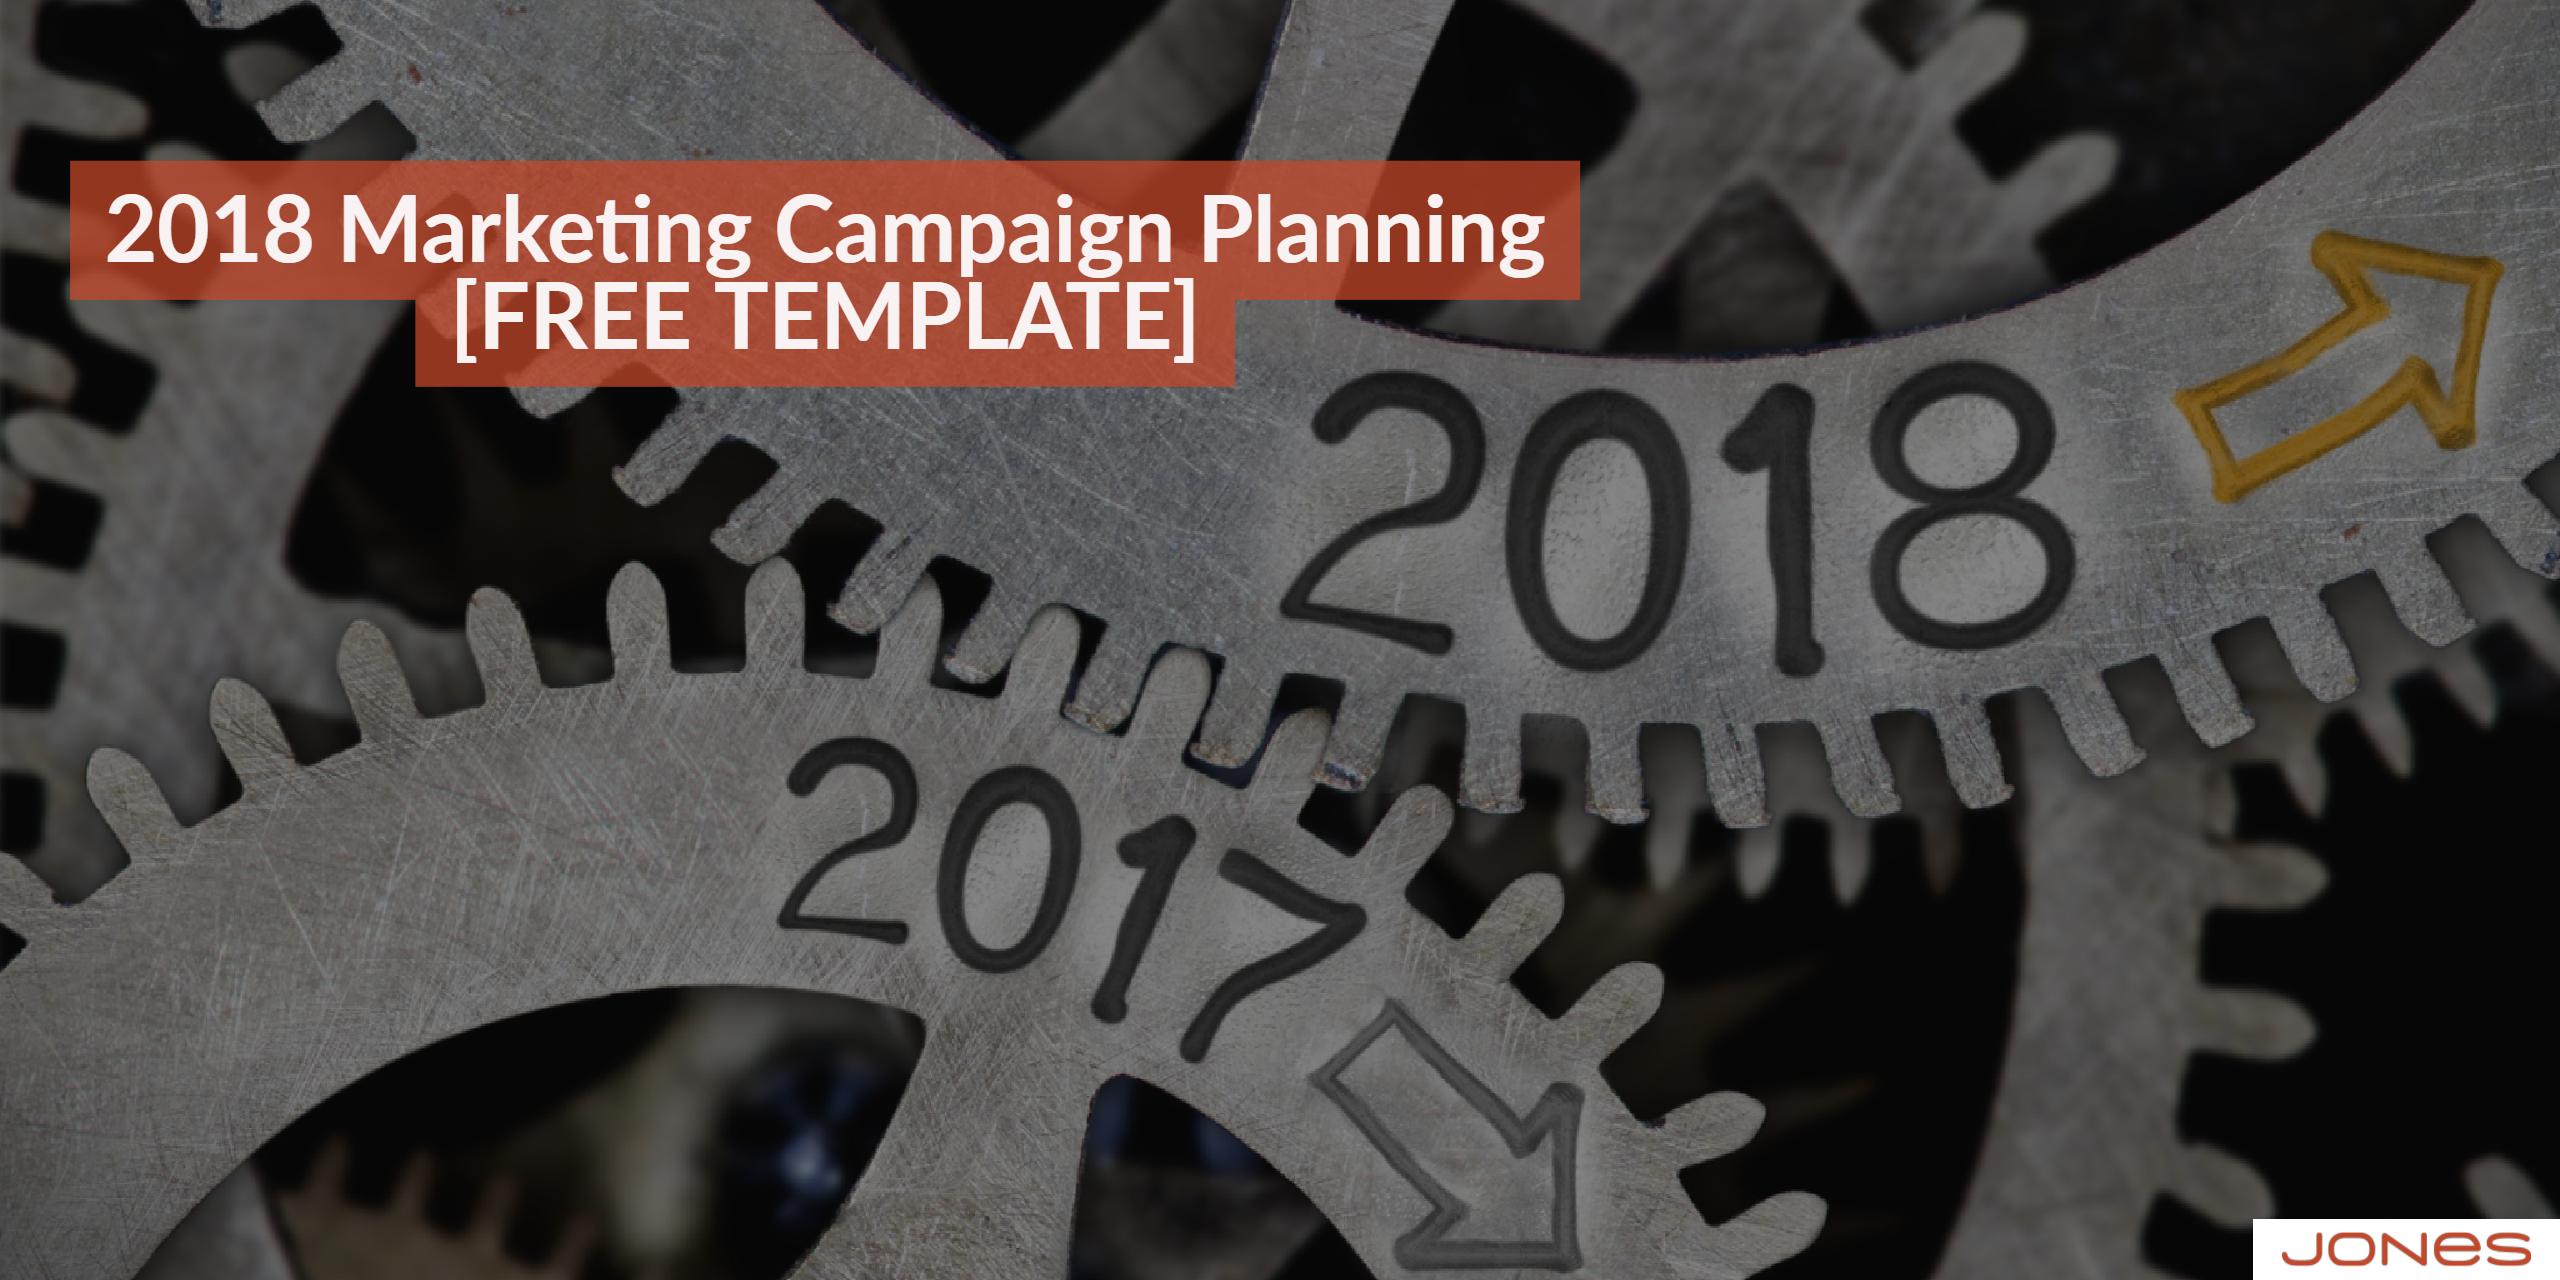 2018 Marketing Plan: It's Time for the Year-End Push